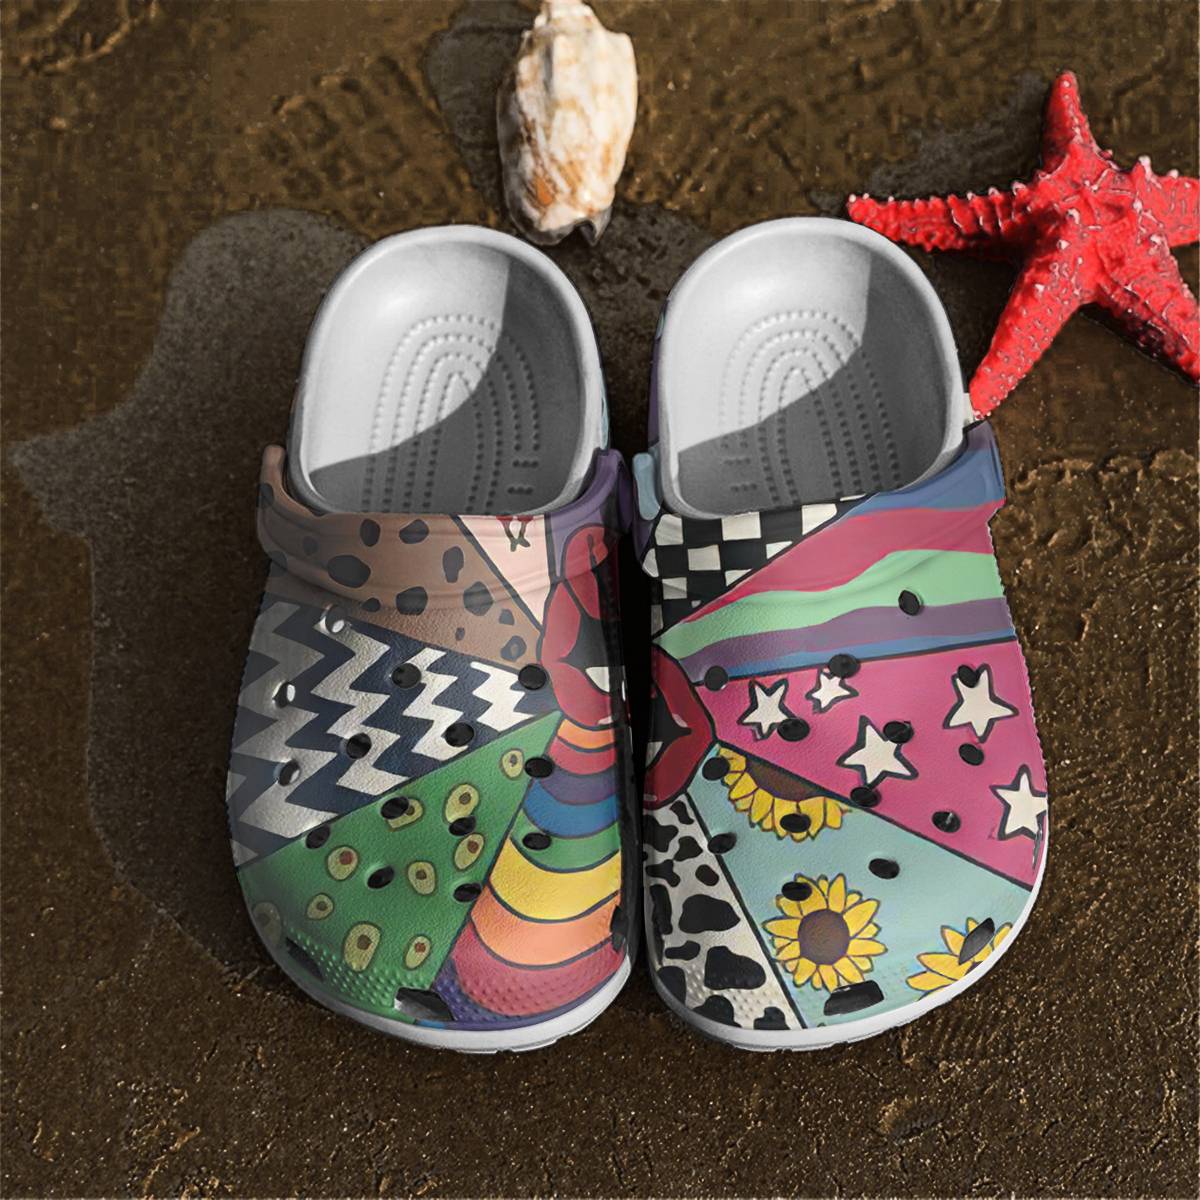 The Rolling Stones Colorful sunshine Crocs – Extra-Licks™